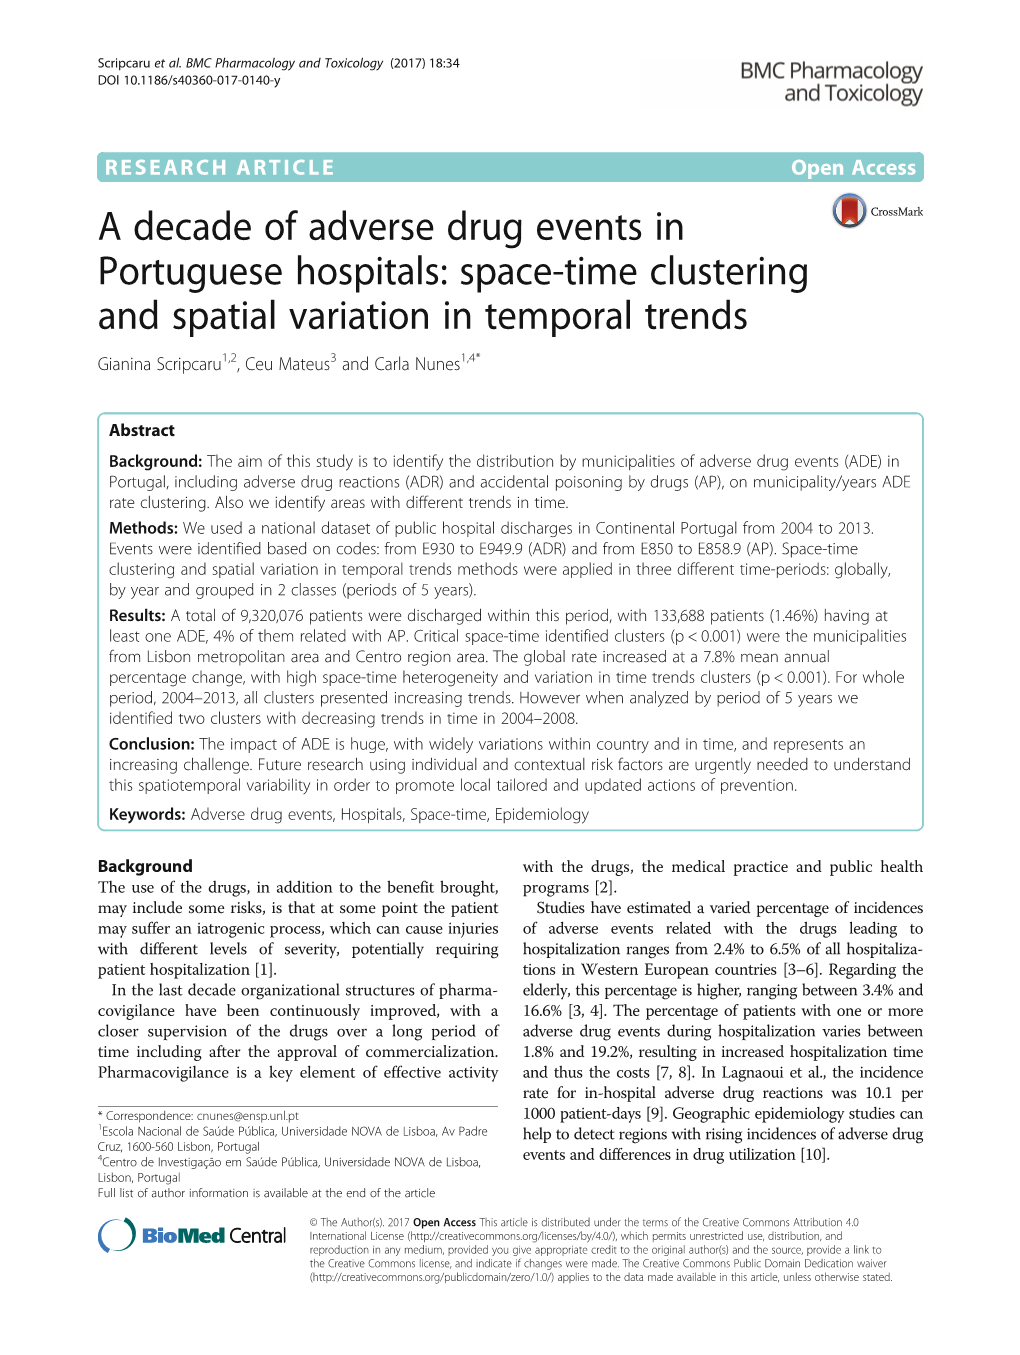 A Decade of Adverse Drug Events in Portuguese Hospitals: Space-Time Clustering and Spatial Variation in Temporal Trends